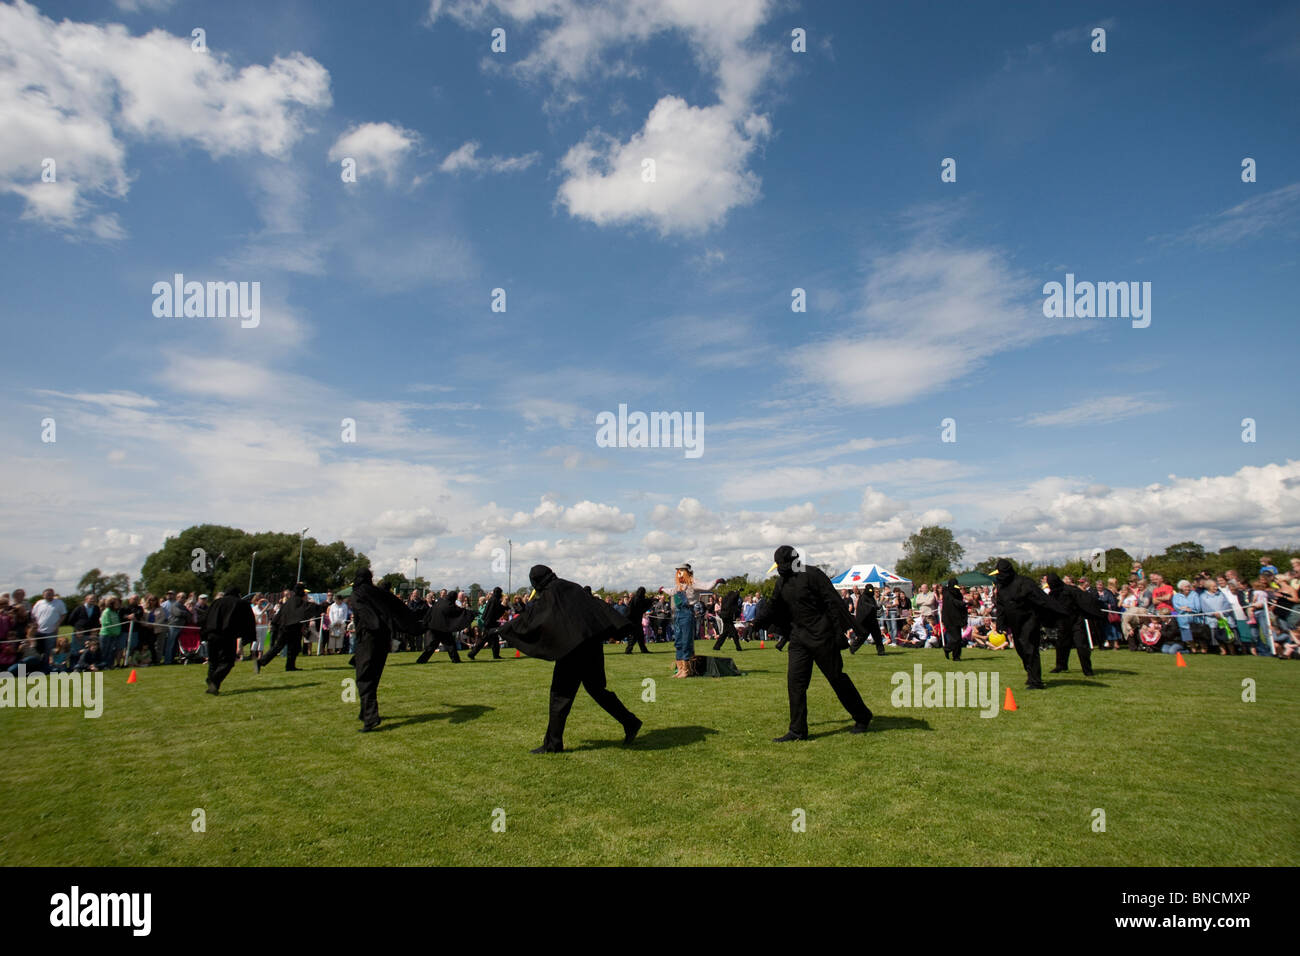 The Crow Dance at the village fair in Moulton, Cheshire. Stock Photo